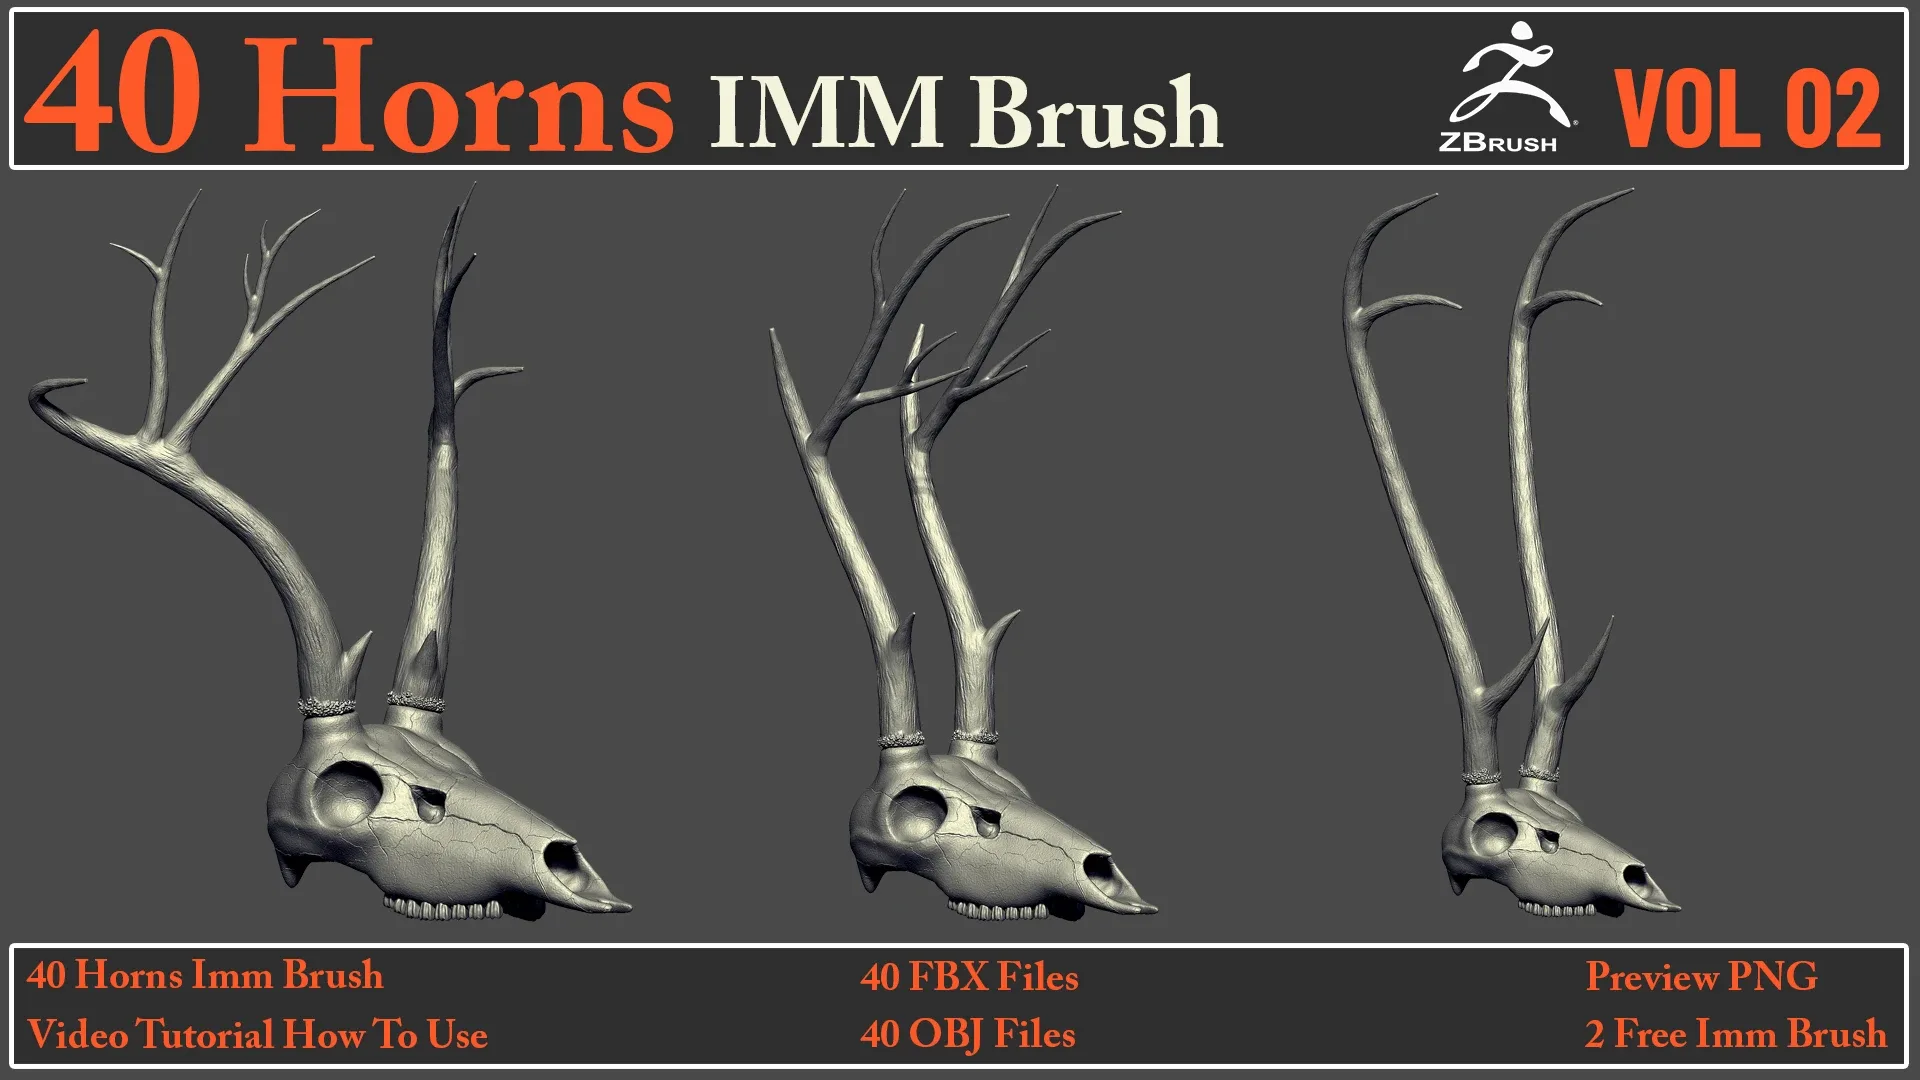 40 Horns IMM Brush VOL 02+ 40 FBX & OBJ Files + Video How To Use